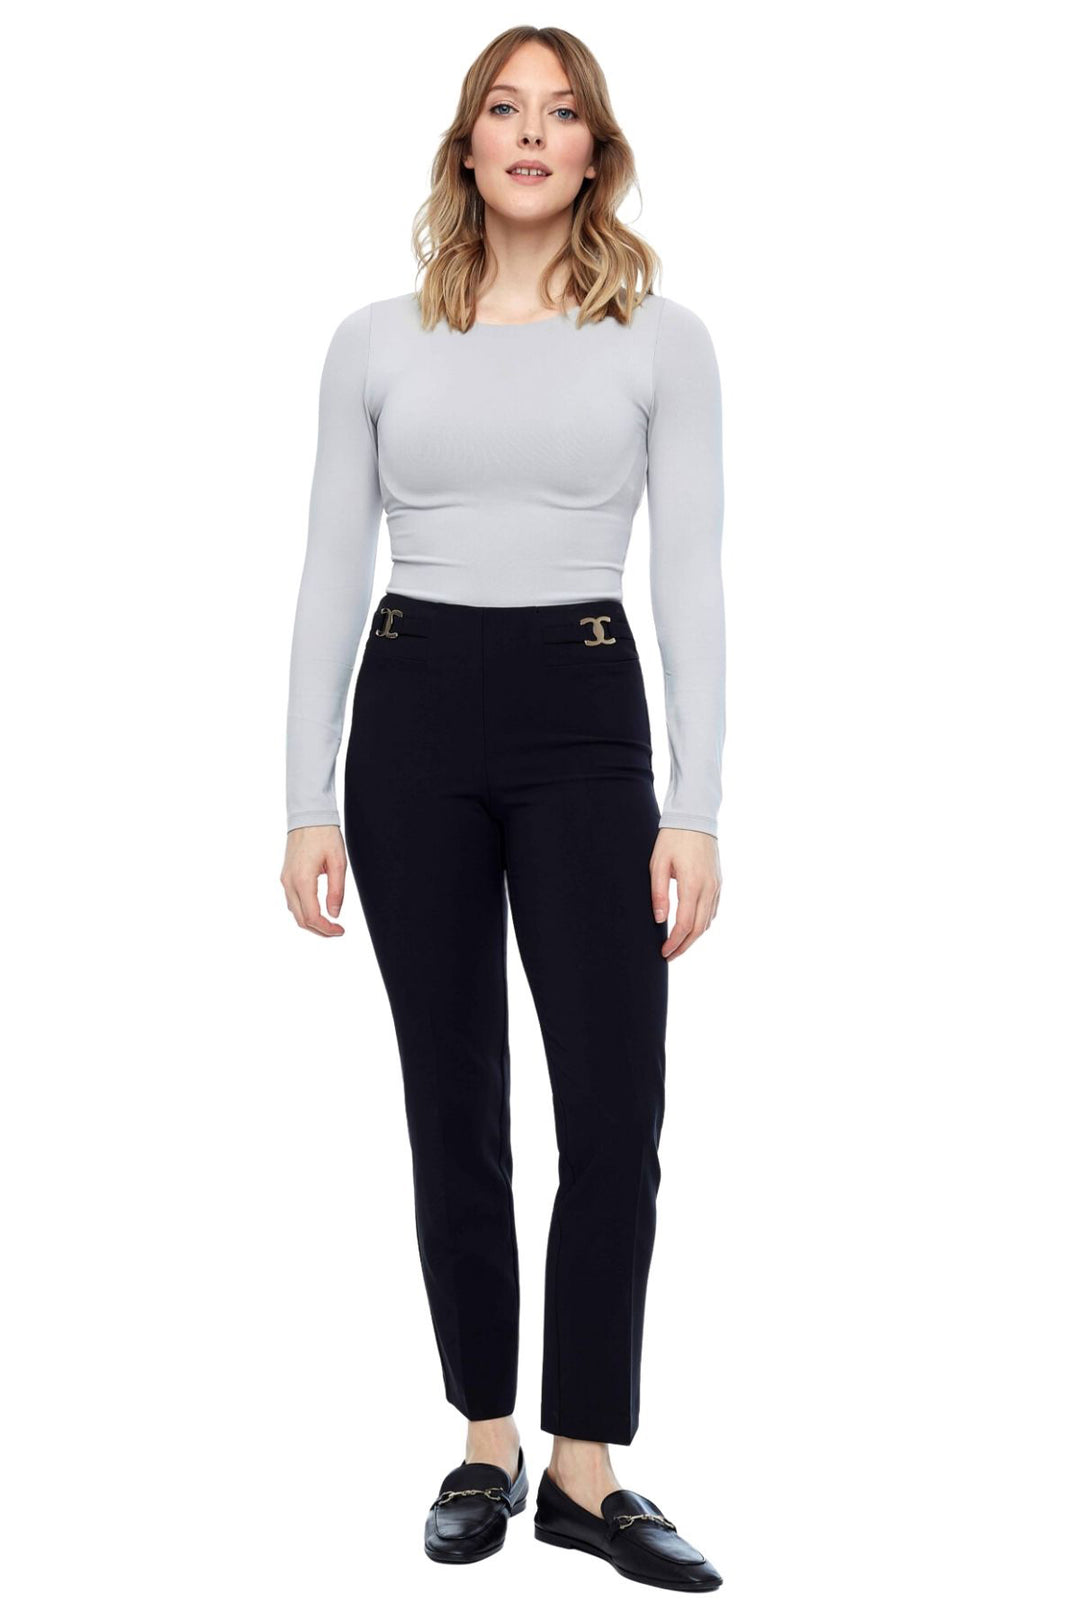 Brand : Up! Style Code : 67592 UP Women’s body-shaping pant Pull-on elastic waistband Built-in tummy control Slim fit Gold monogram detailing Tailored leg pleats Ankle length